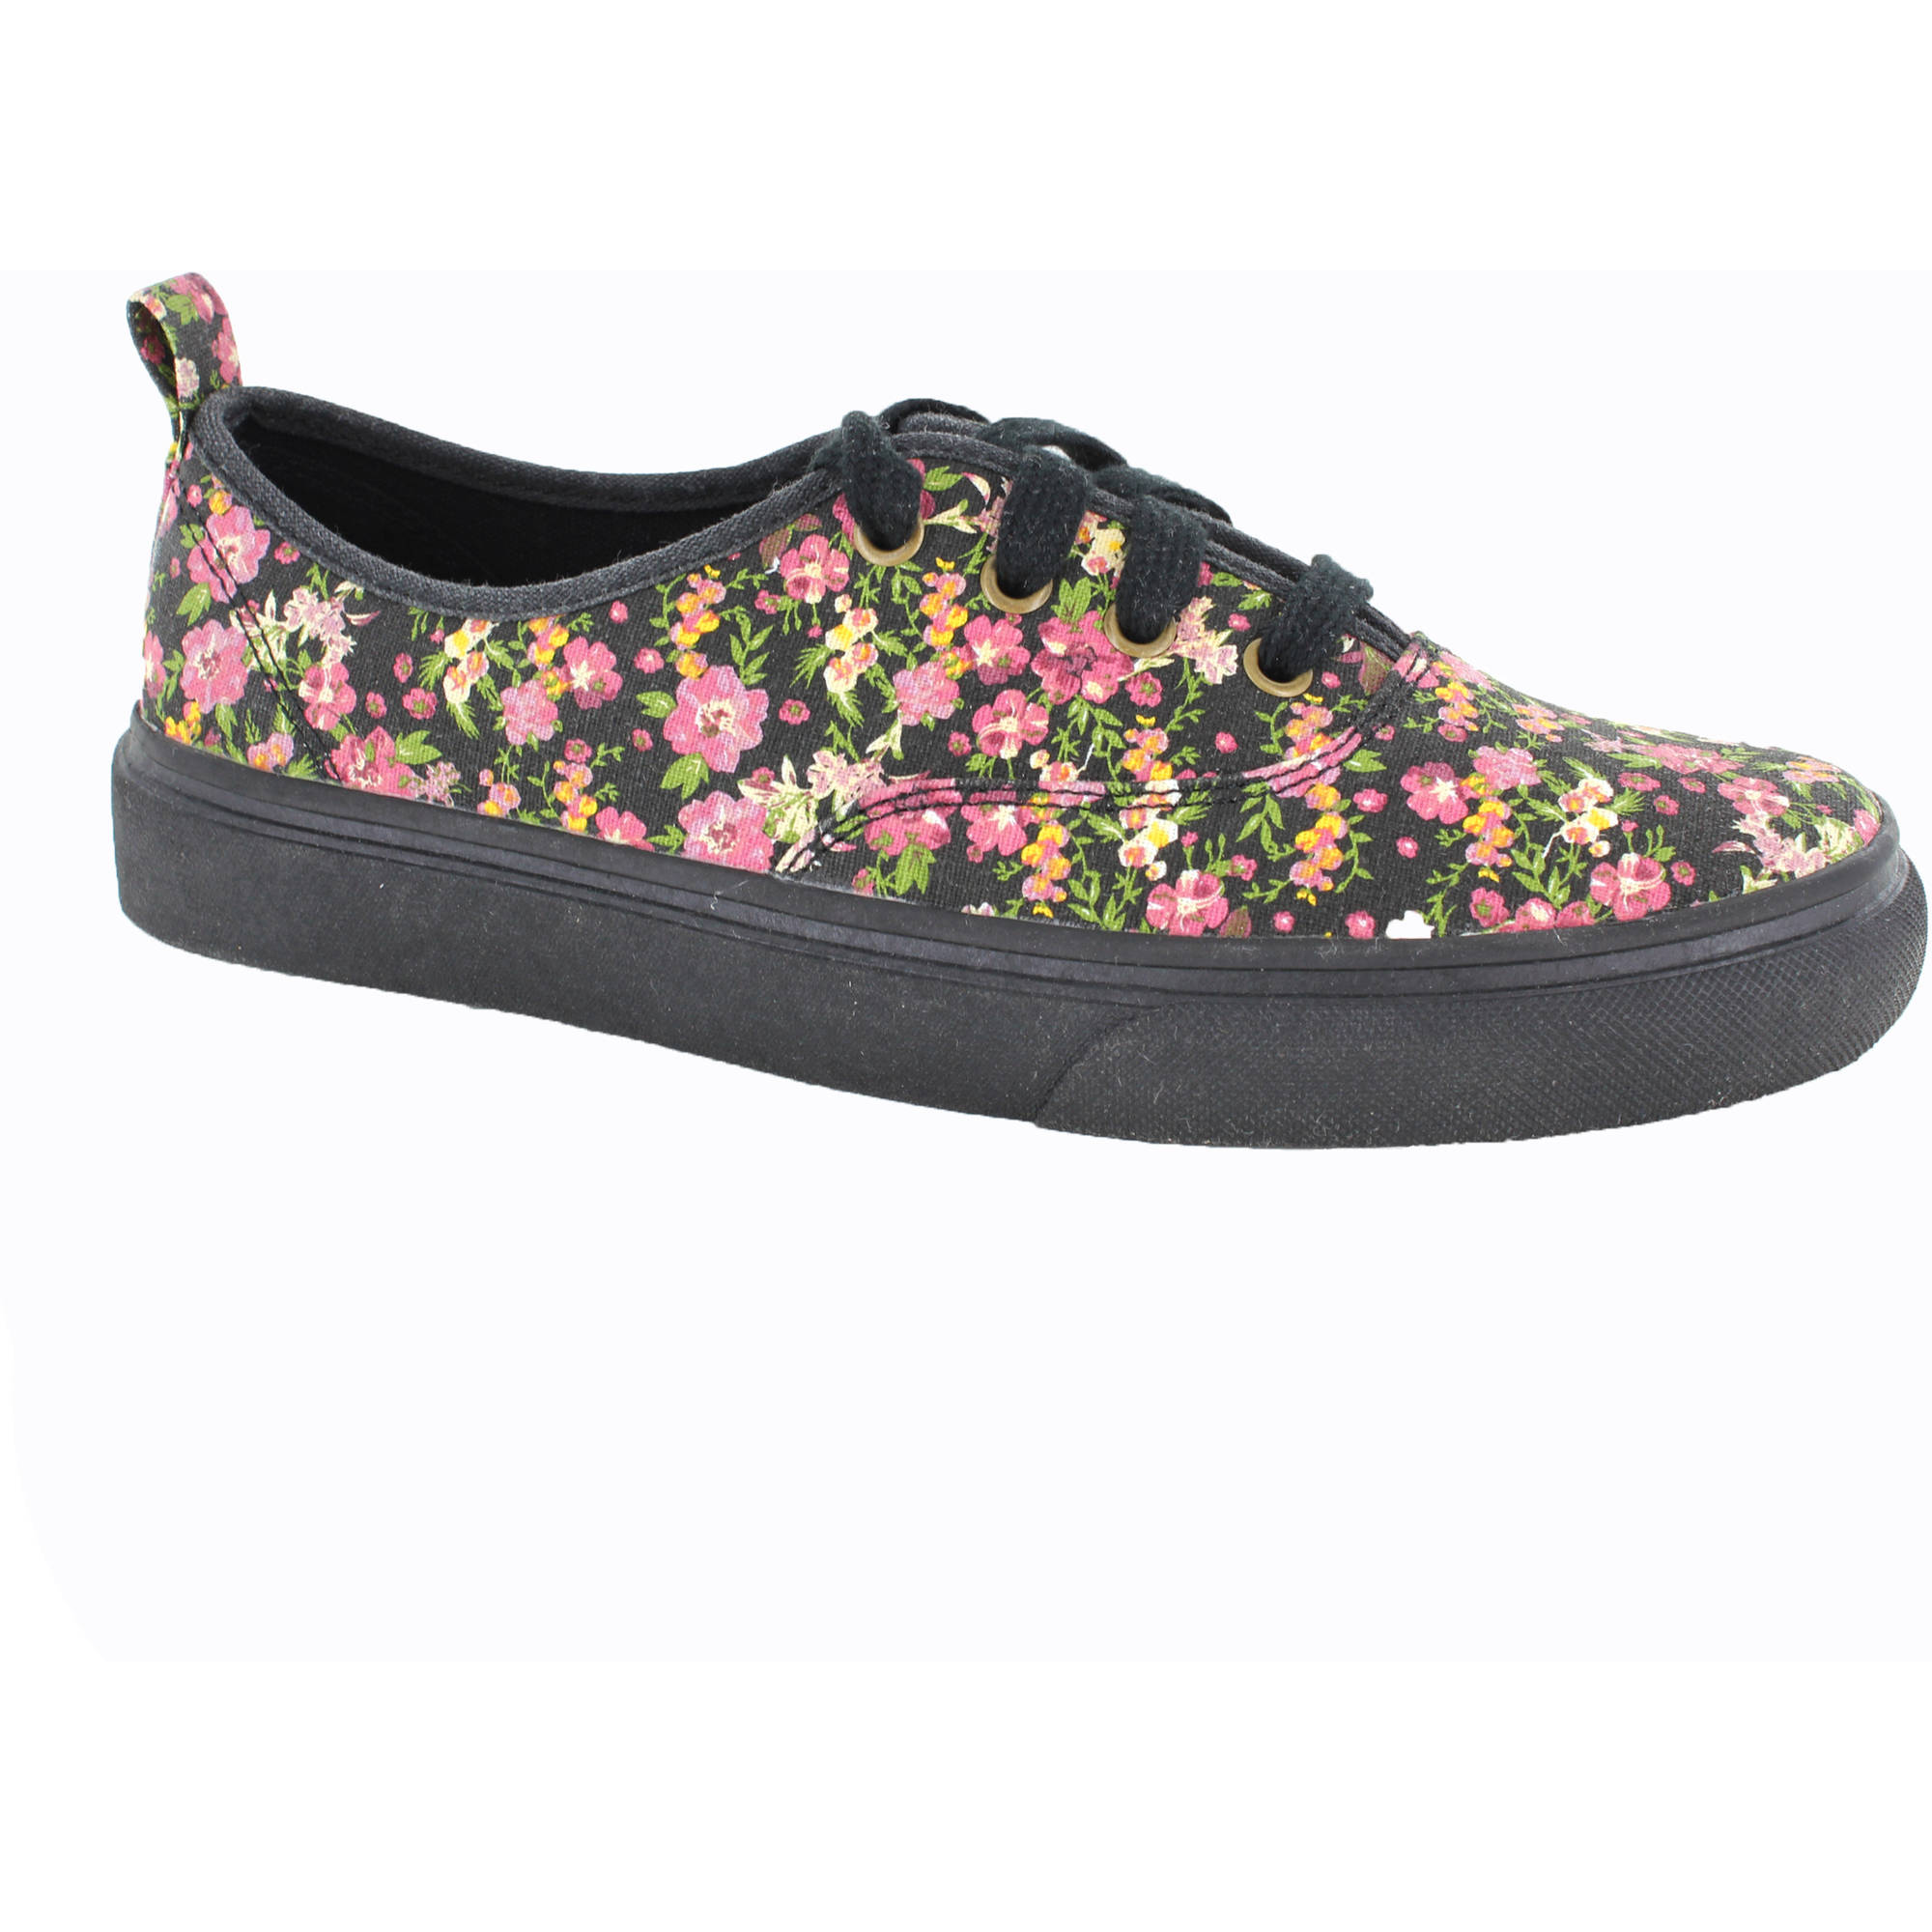 faded glory women's canvas shoes